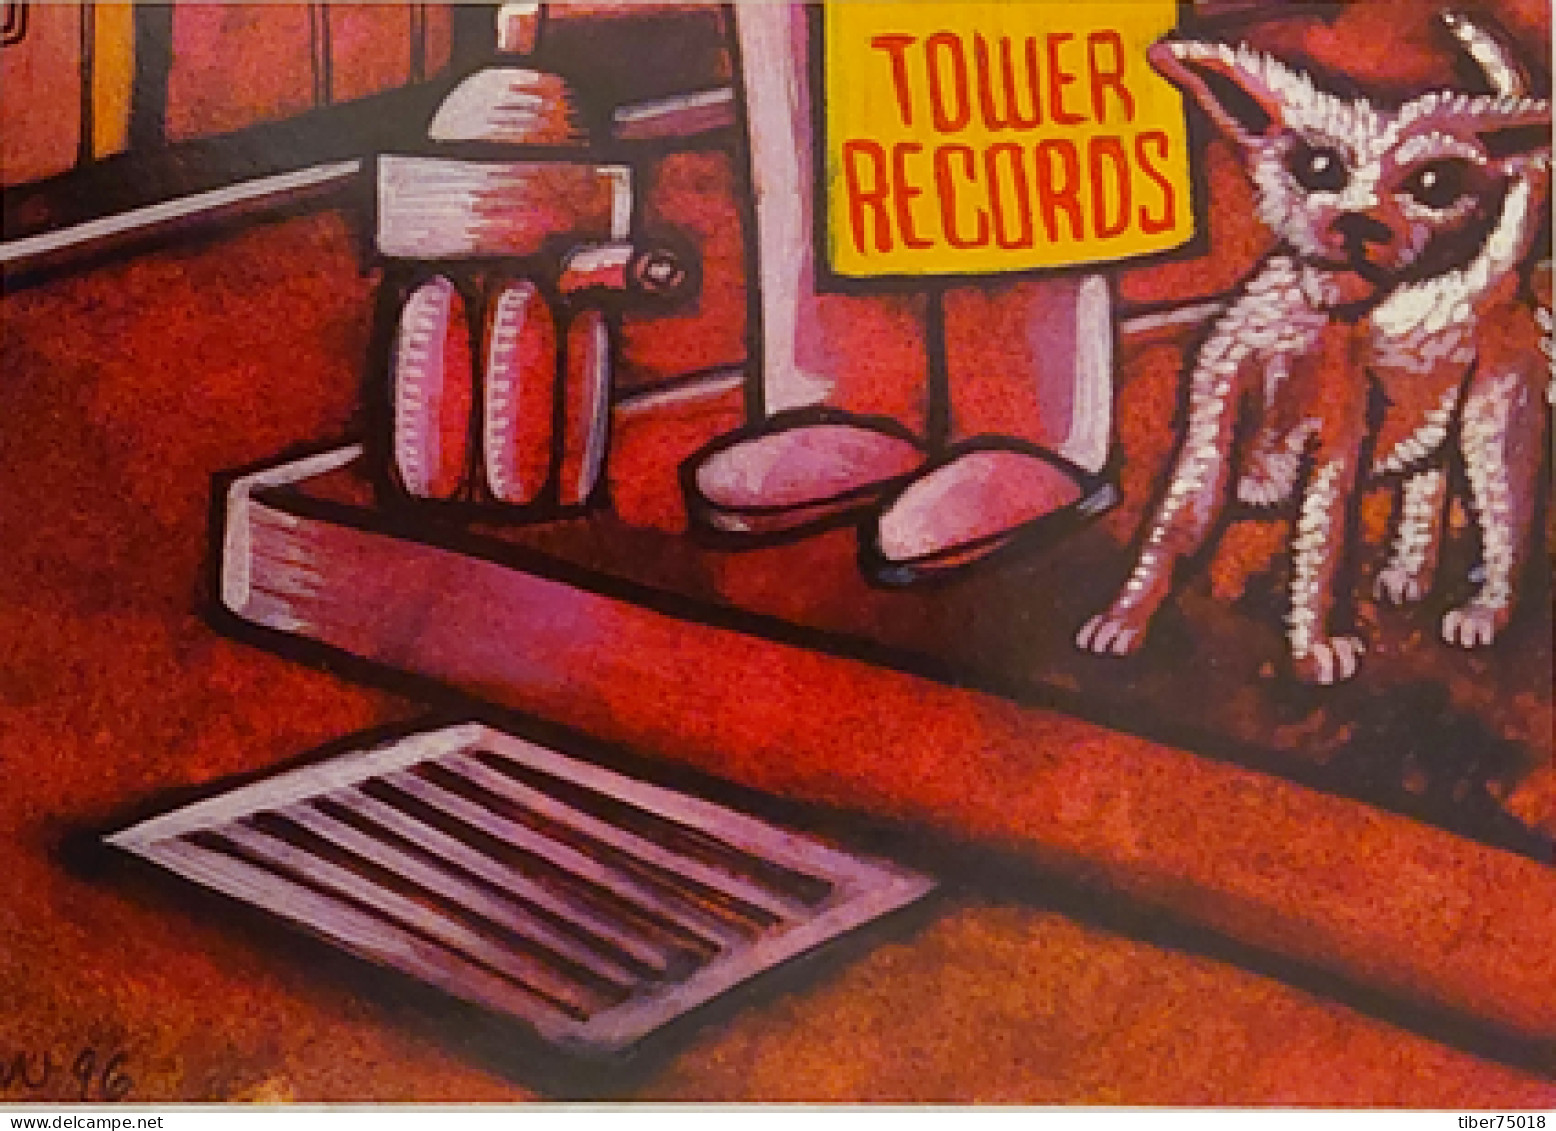 Carte Postale (Tower Records) Tower, The Internet's Real Record Store - Illustration : Strephon Taylor - Publicidad